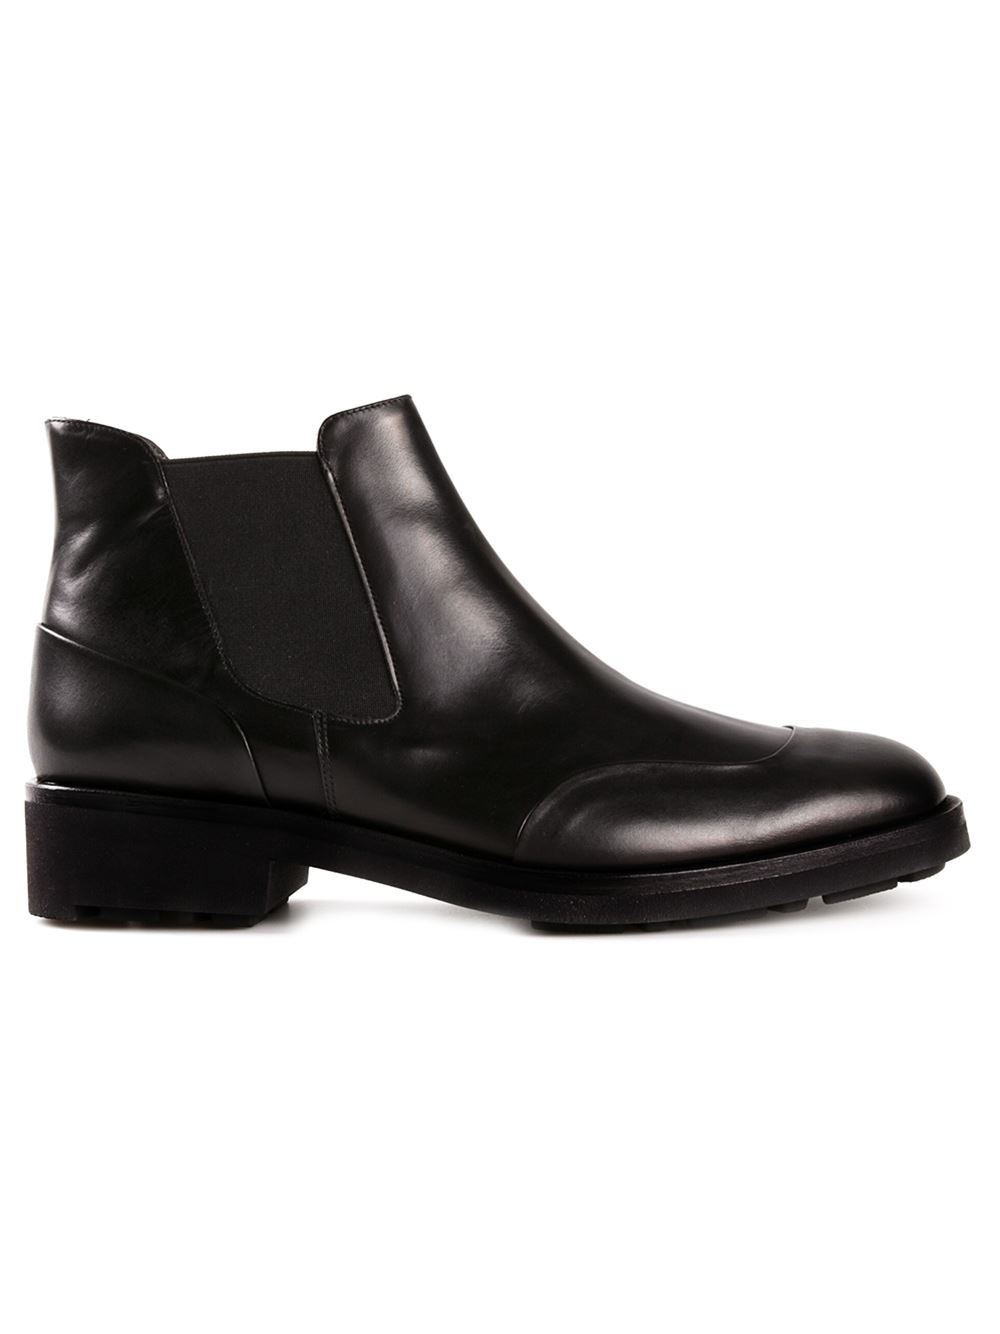 Robert Clergerie Jacques Chelsea Boots in Black for Men | Lyst